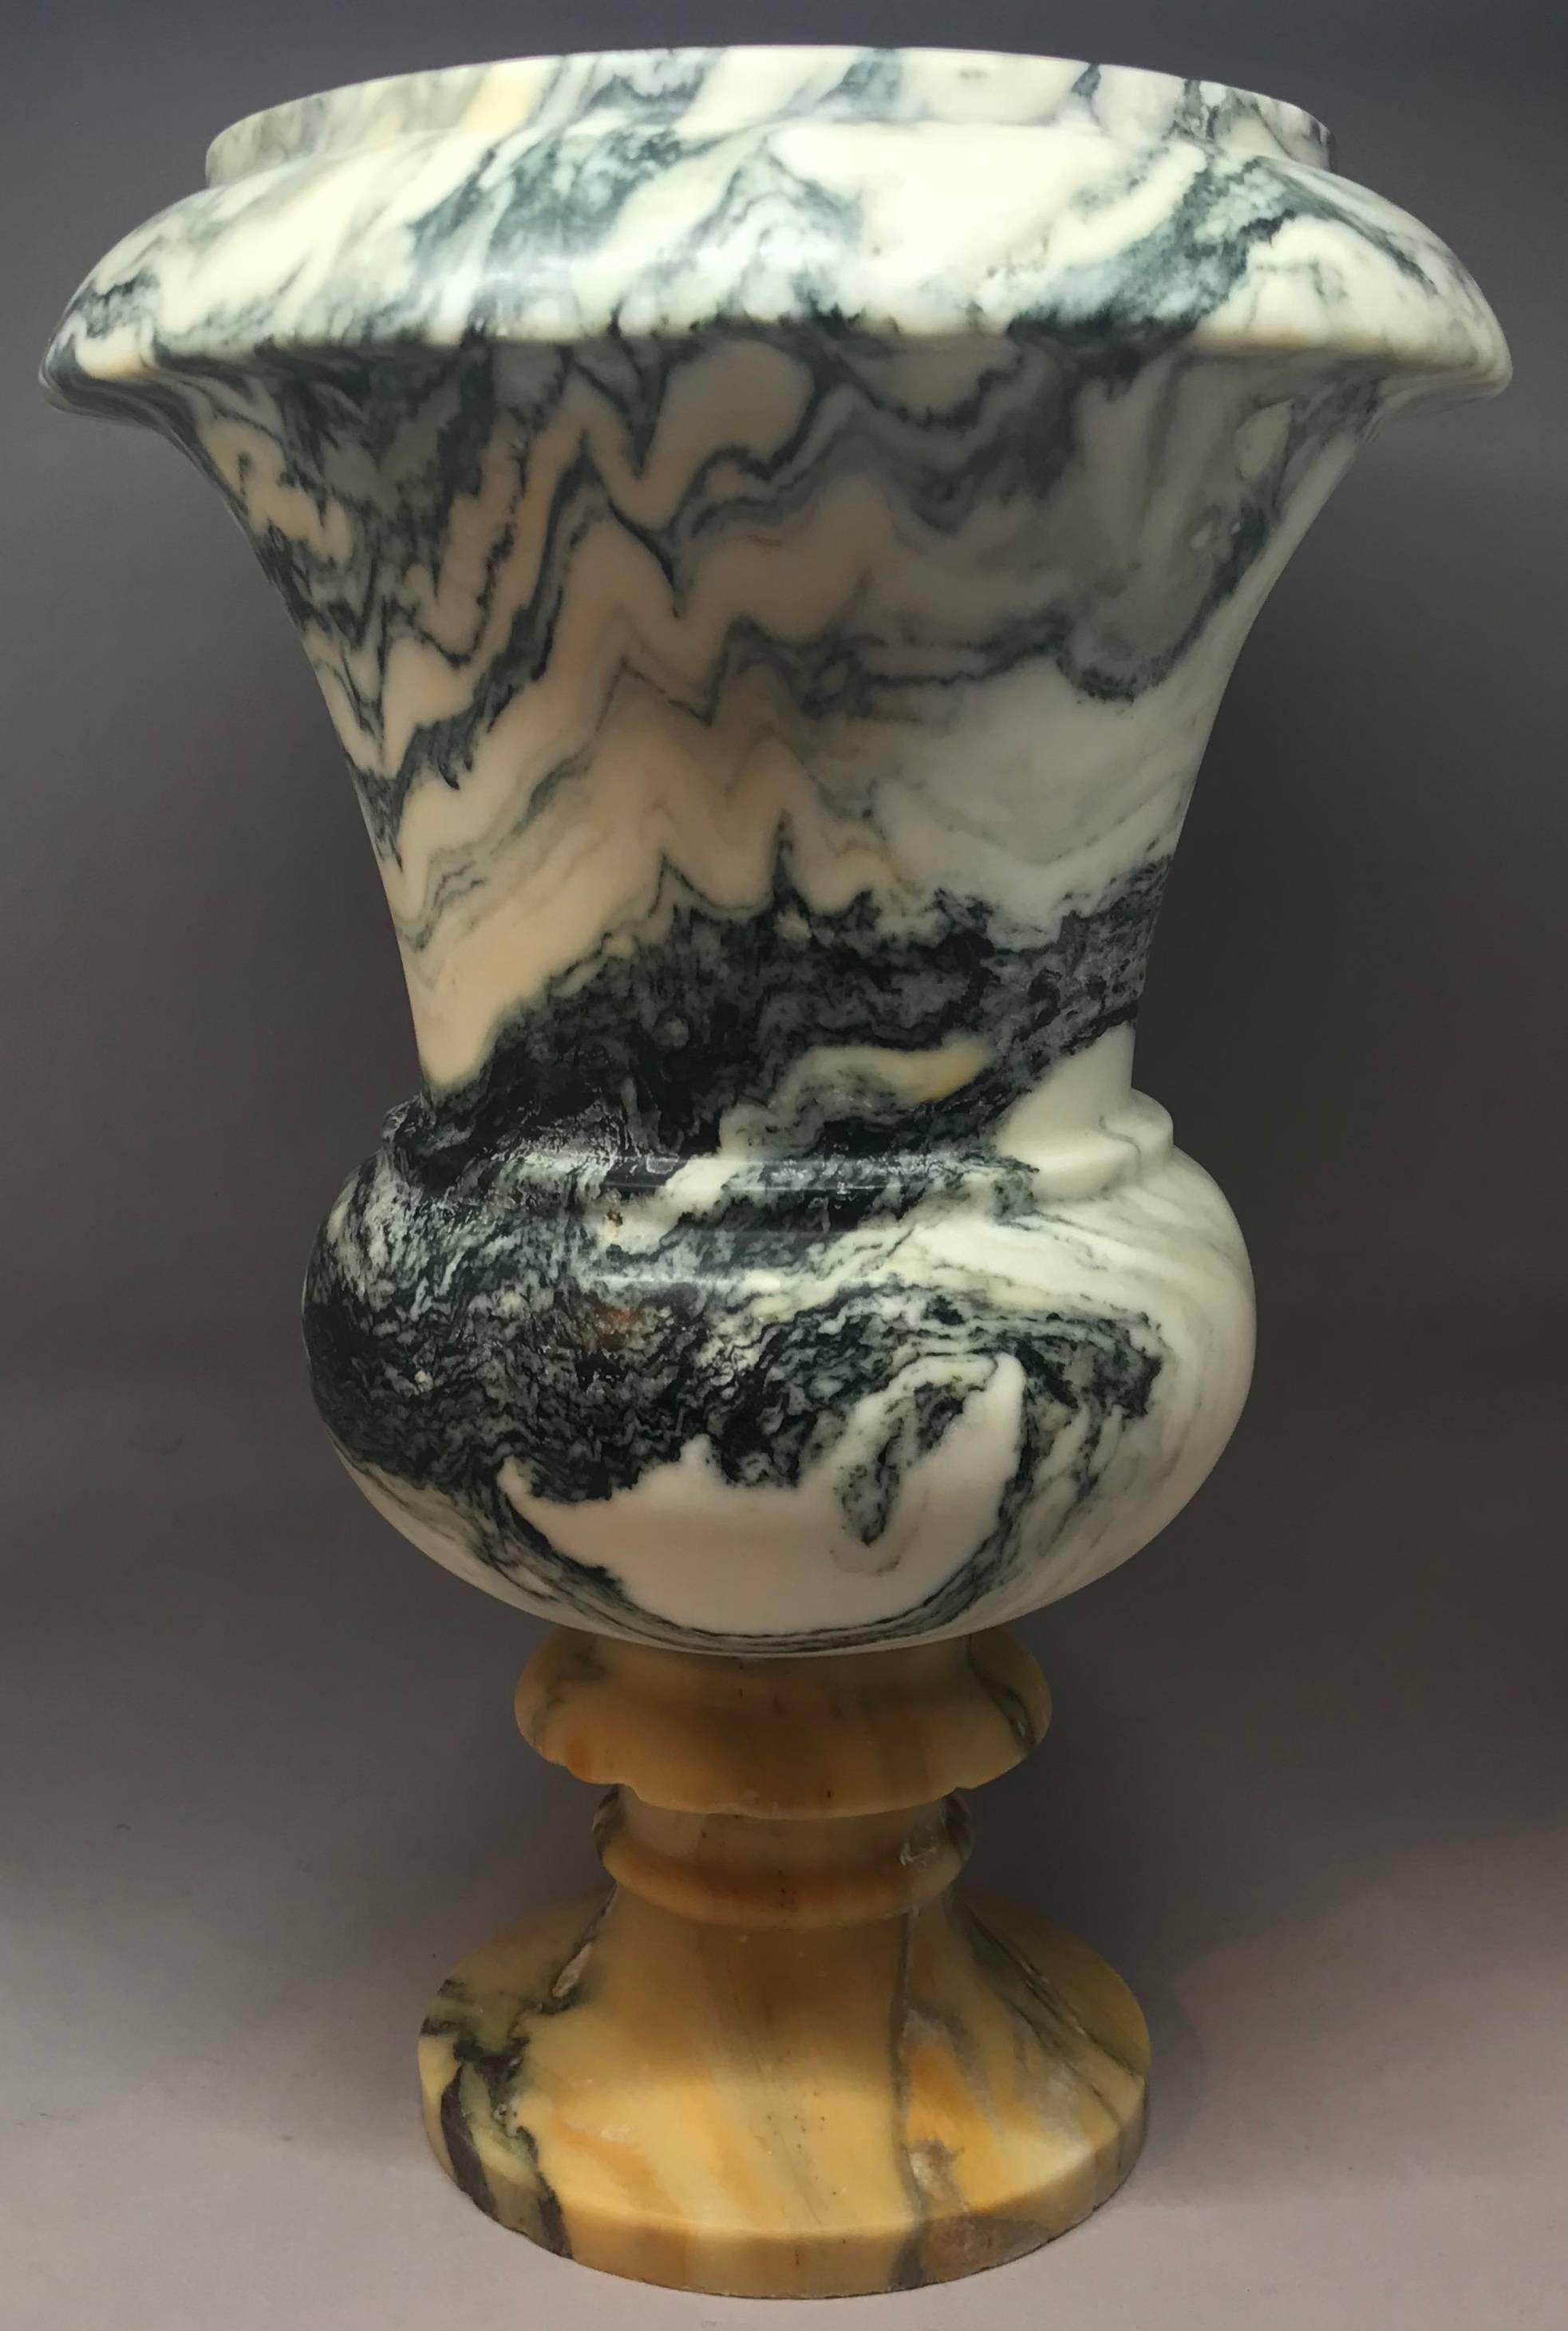 Italian marble Medici style vase Antique richly veined marble vase in the Medici style with cipollino carved top and a giallo di Siena base, Italy, circa 1925.
Dimensions: 9